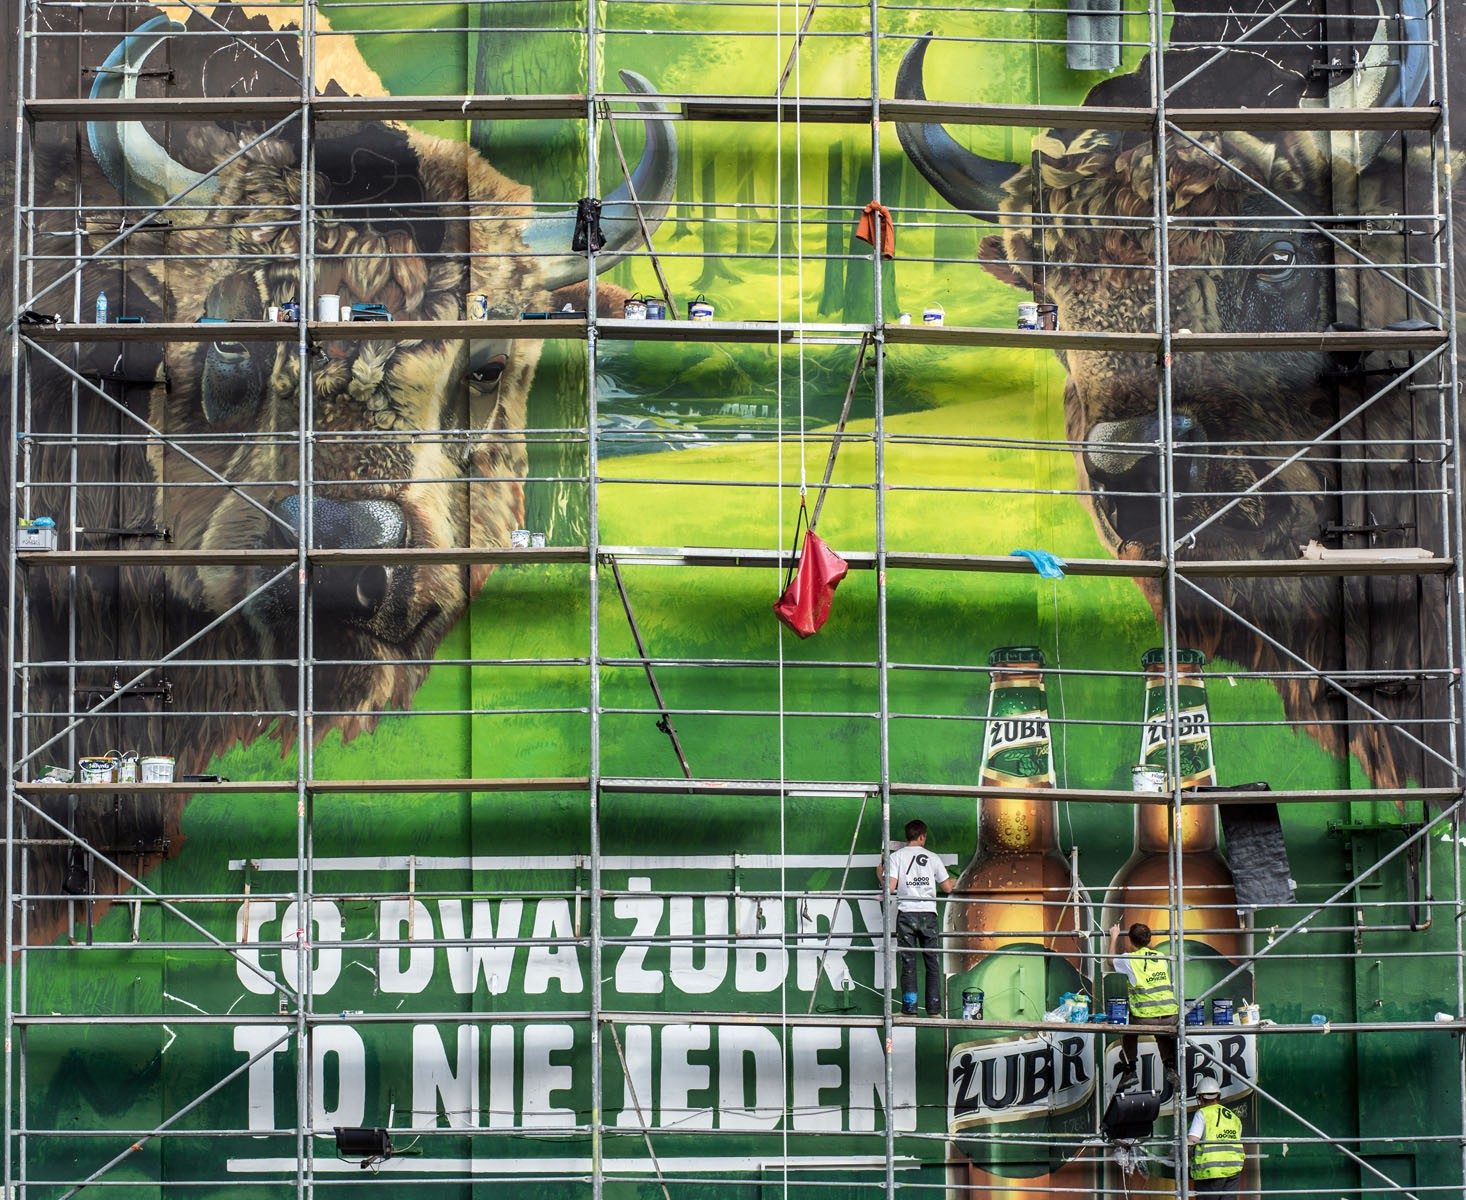 Advertising mural Every two Zubr are better than one in Warsaw Bracka street Department Store Bracia Jablkowscy | Every two Zubr are better than one | Portfolio